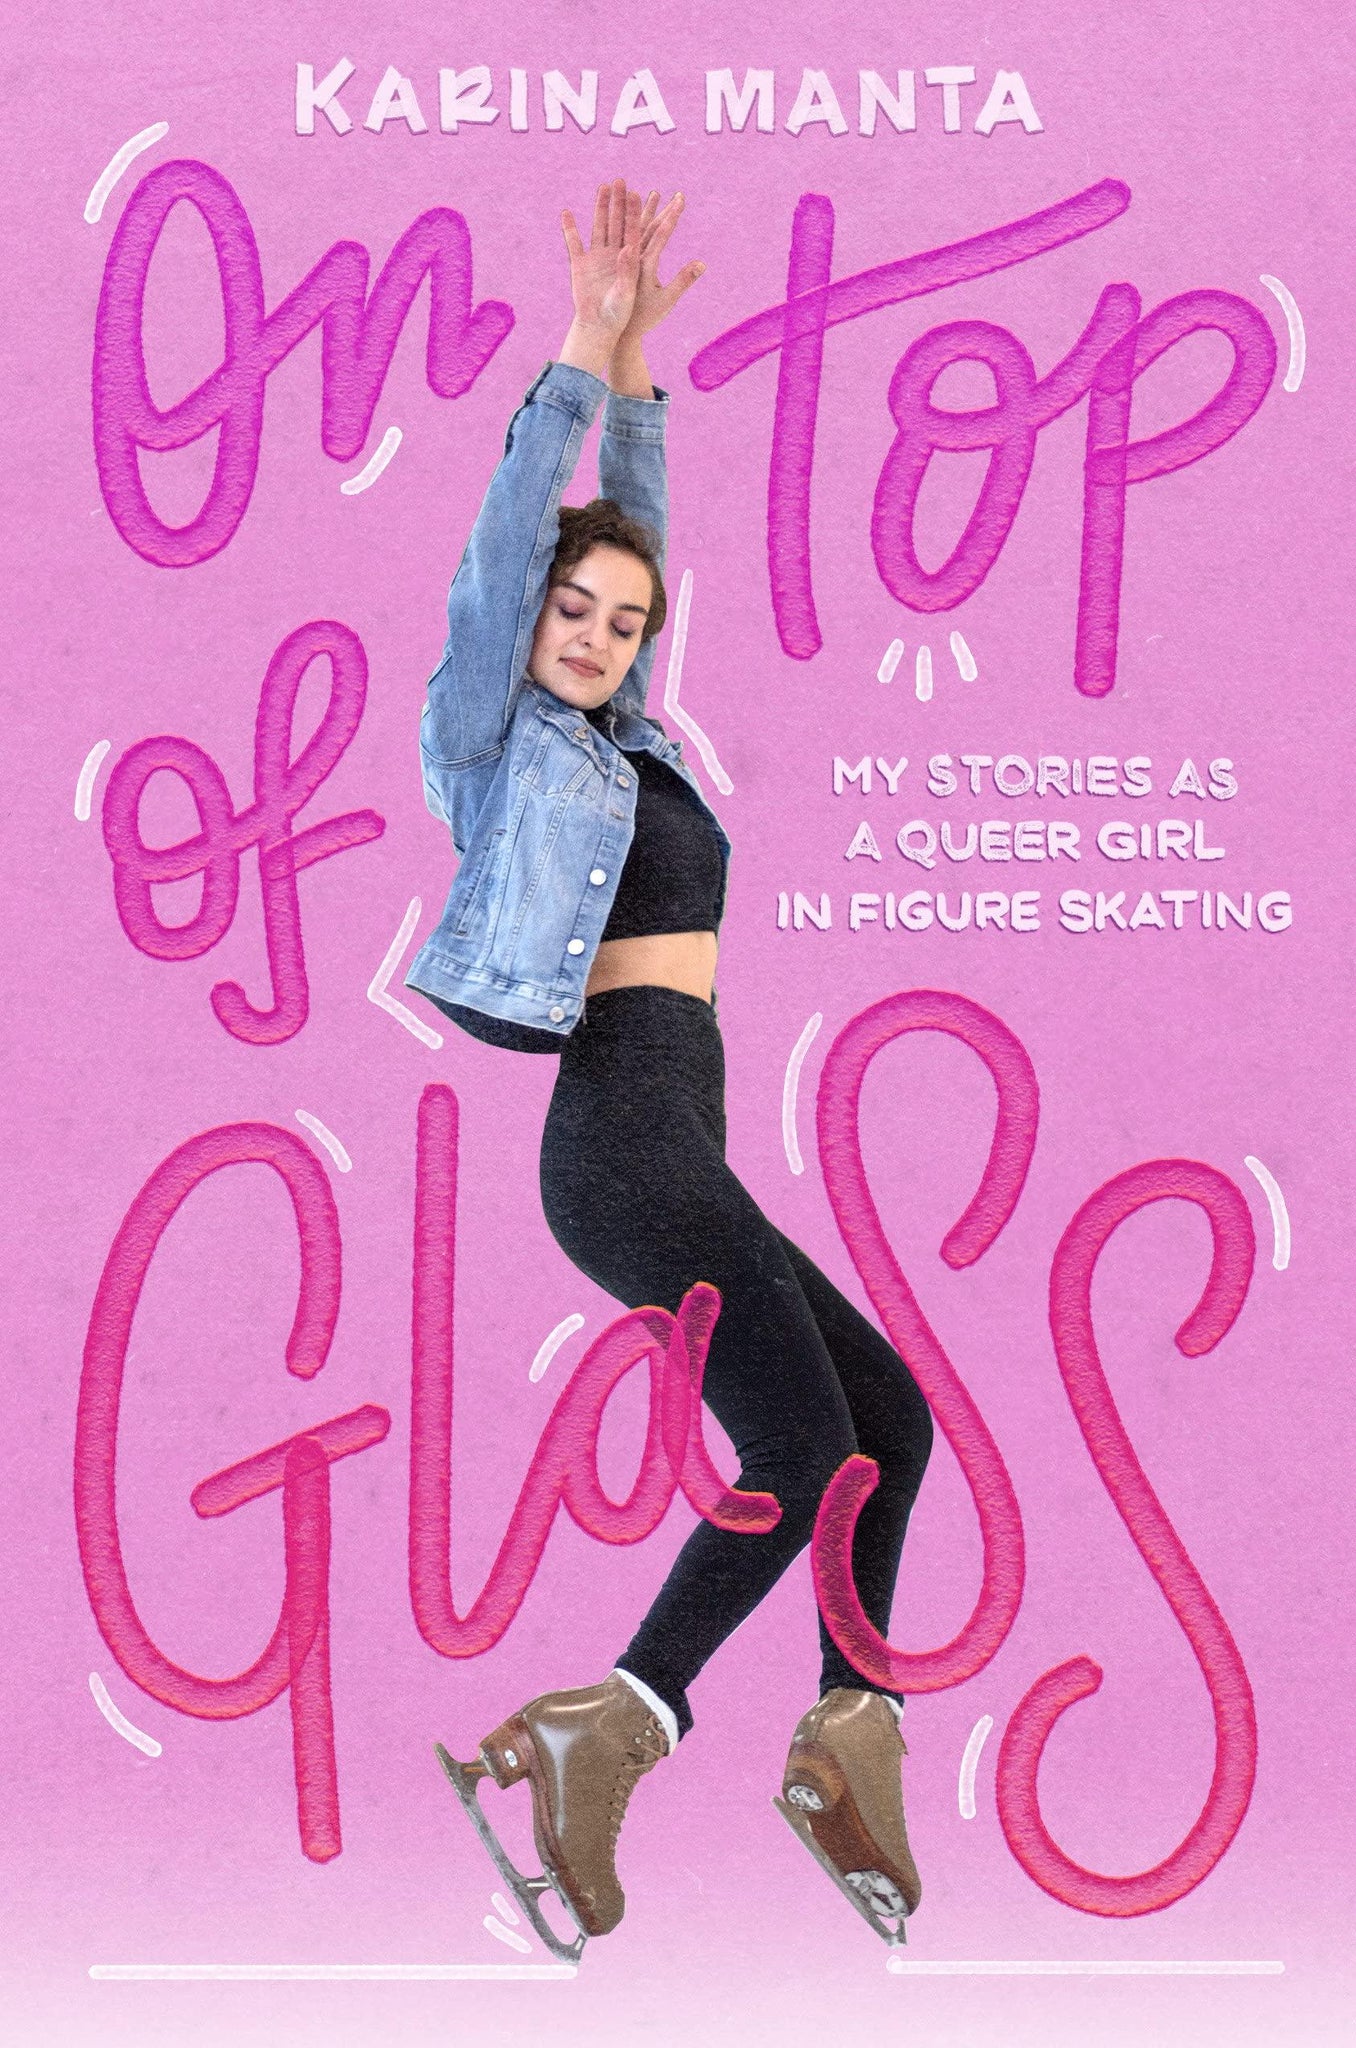 On Top of Glass: My Stories as a Queer Girl in Figure Skating - ShopQueer.co